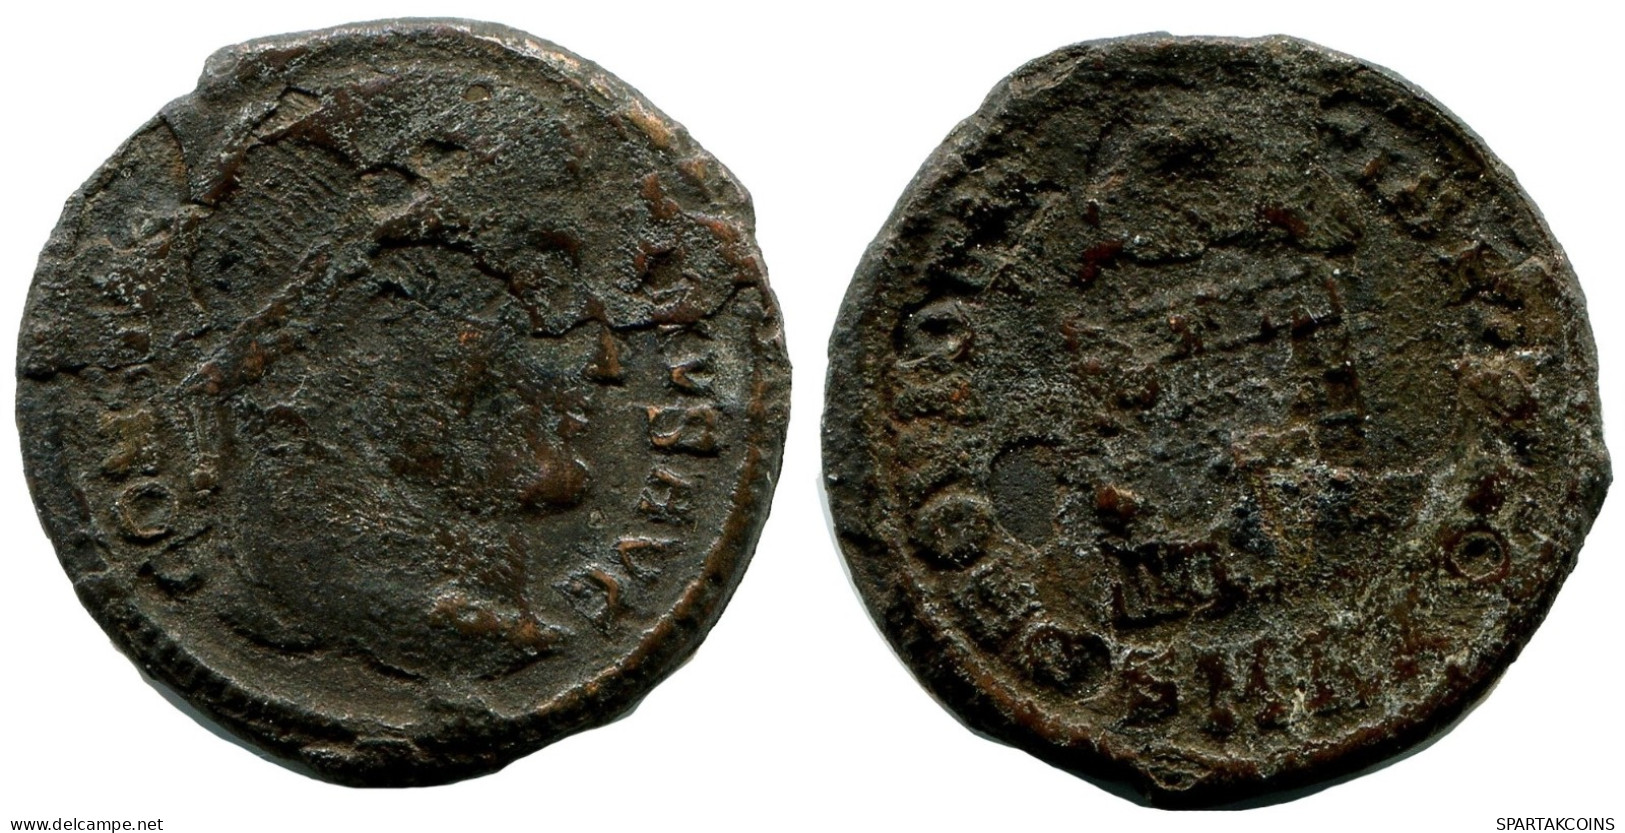 CONSTANTINE I MINTED IN CYZICUS FOUND IN IHNASYAH HOARD EGYPT #ANC11029.14.D.A - The Christian Empire (307 AD Tot 363 AD)